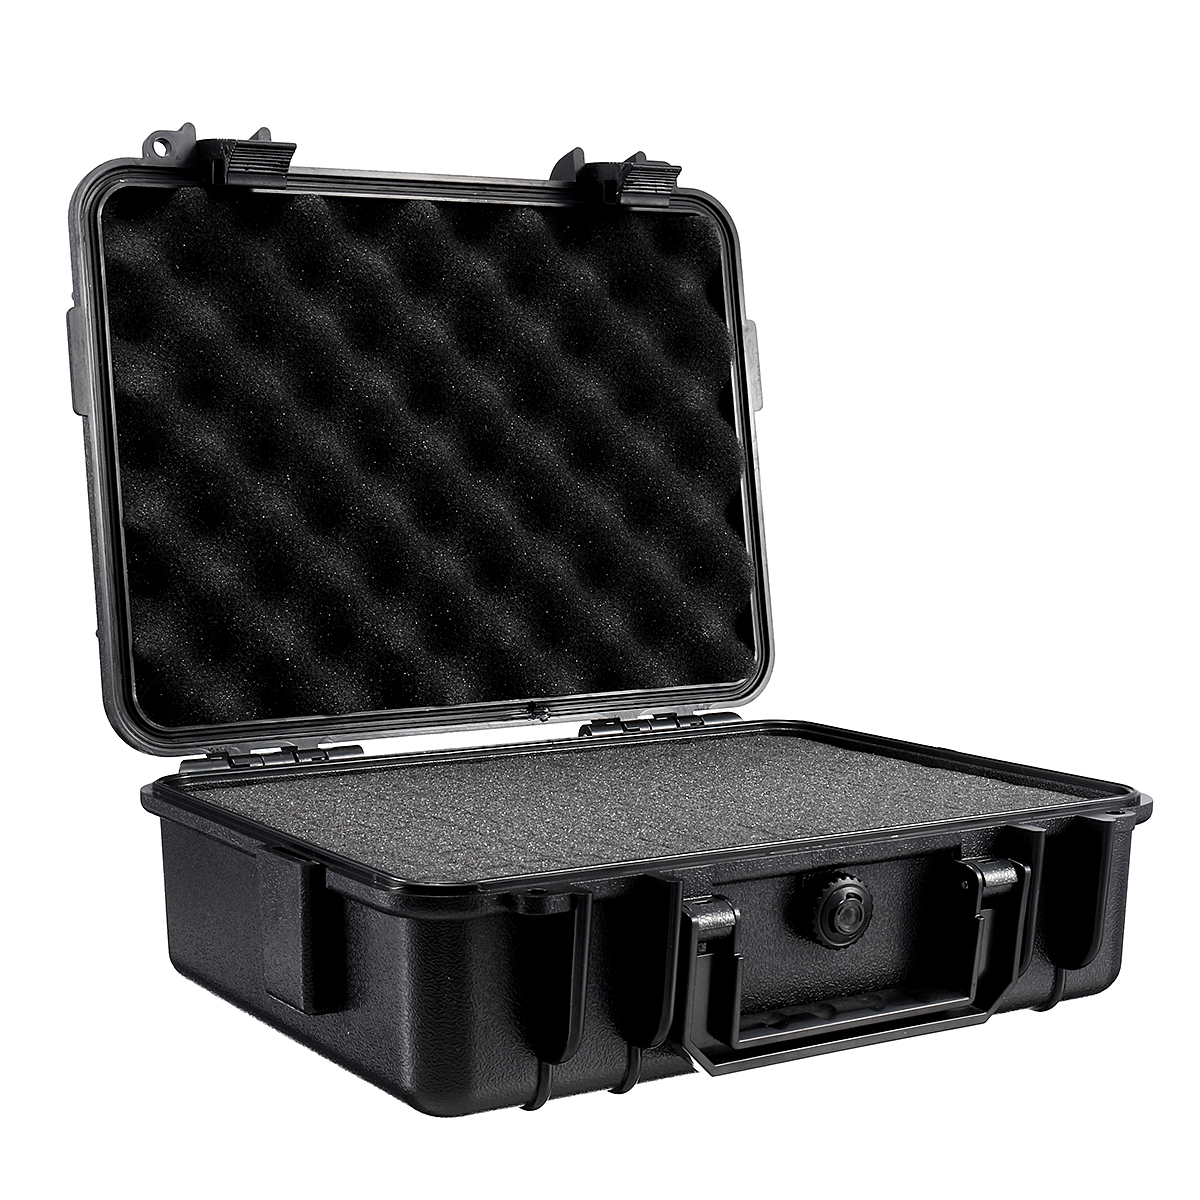 275x210x90mm-Waterproof-Hard-Carry-Camera-Lens-Photography-Tool-Case-Bag-Storage-Box-with-Sponge-1351344